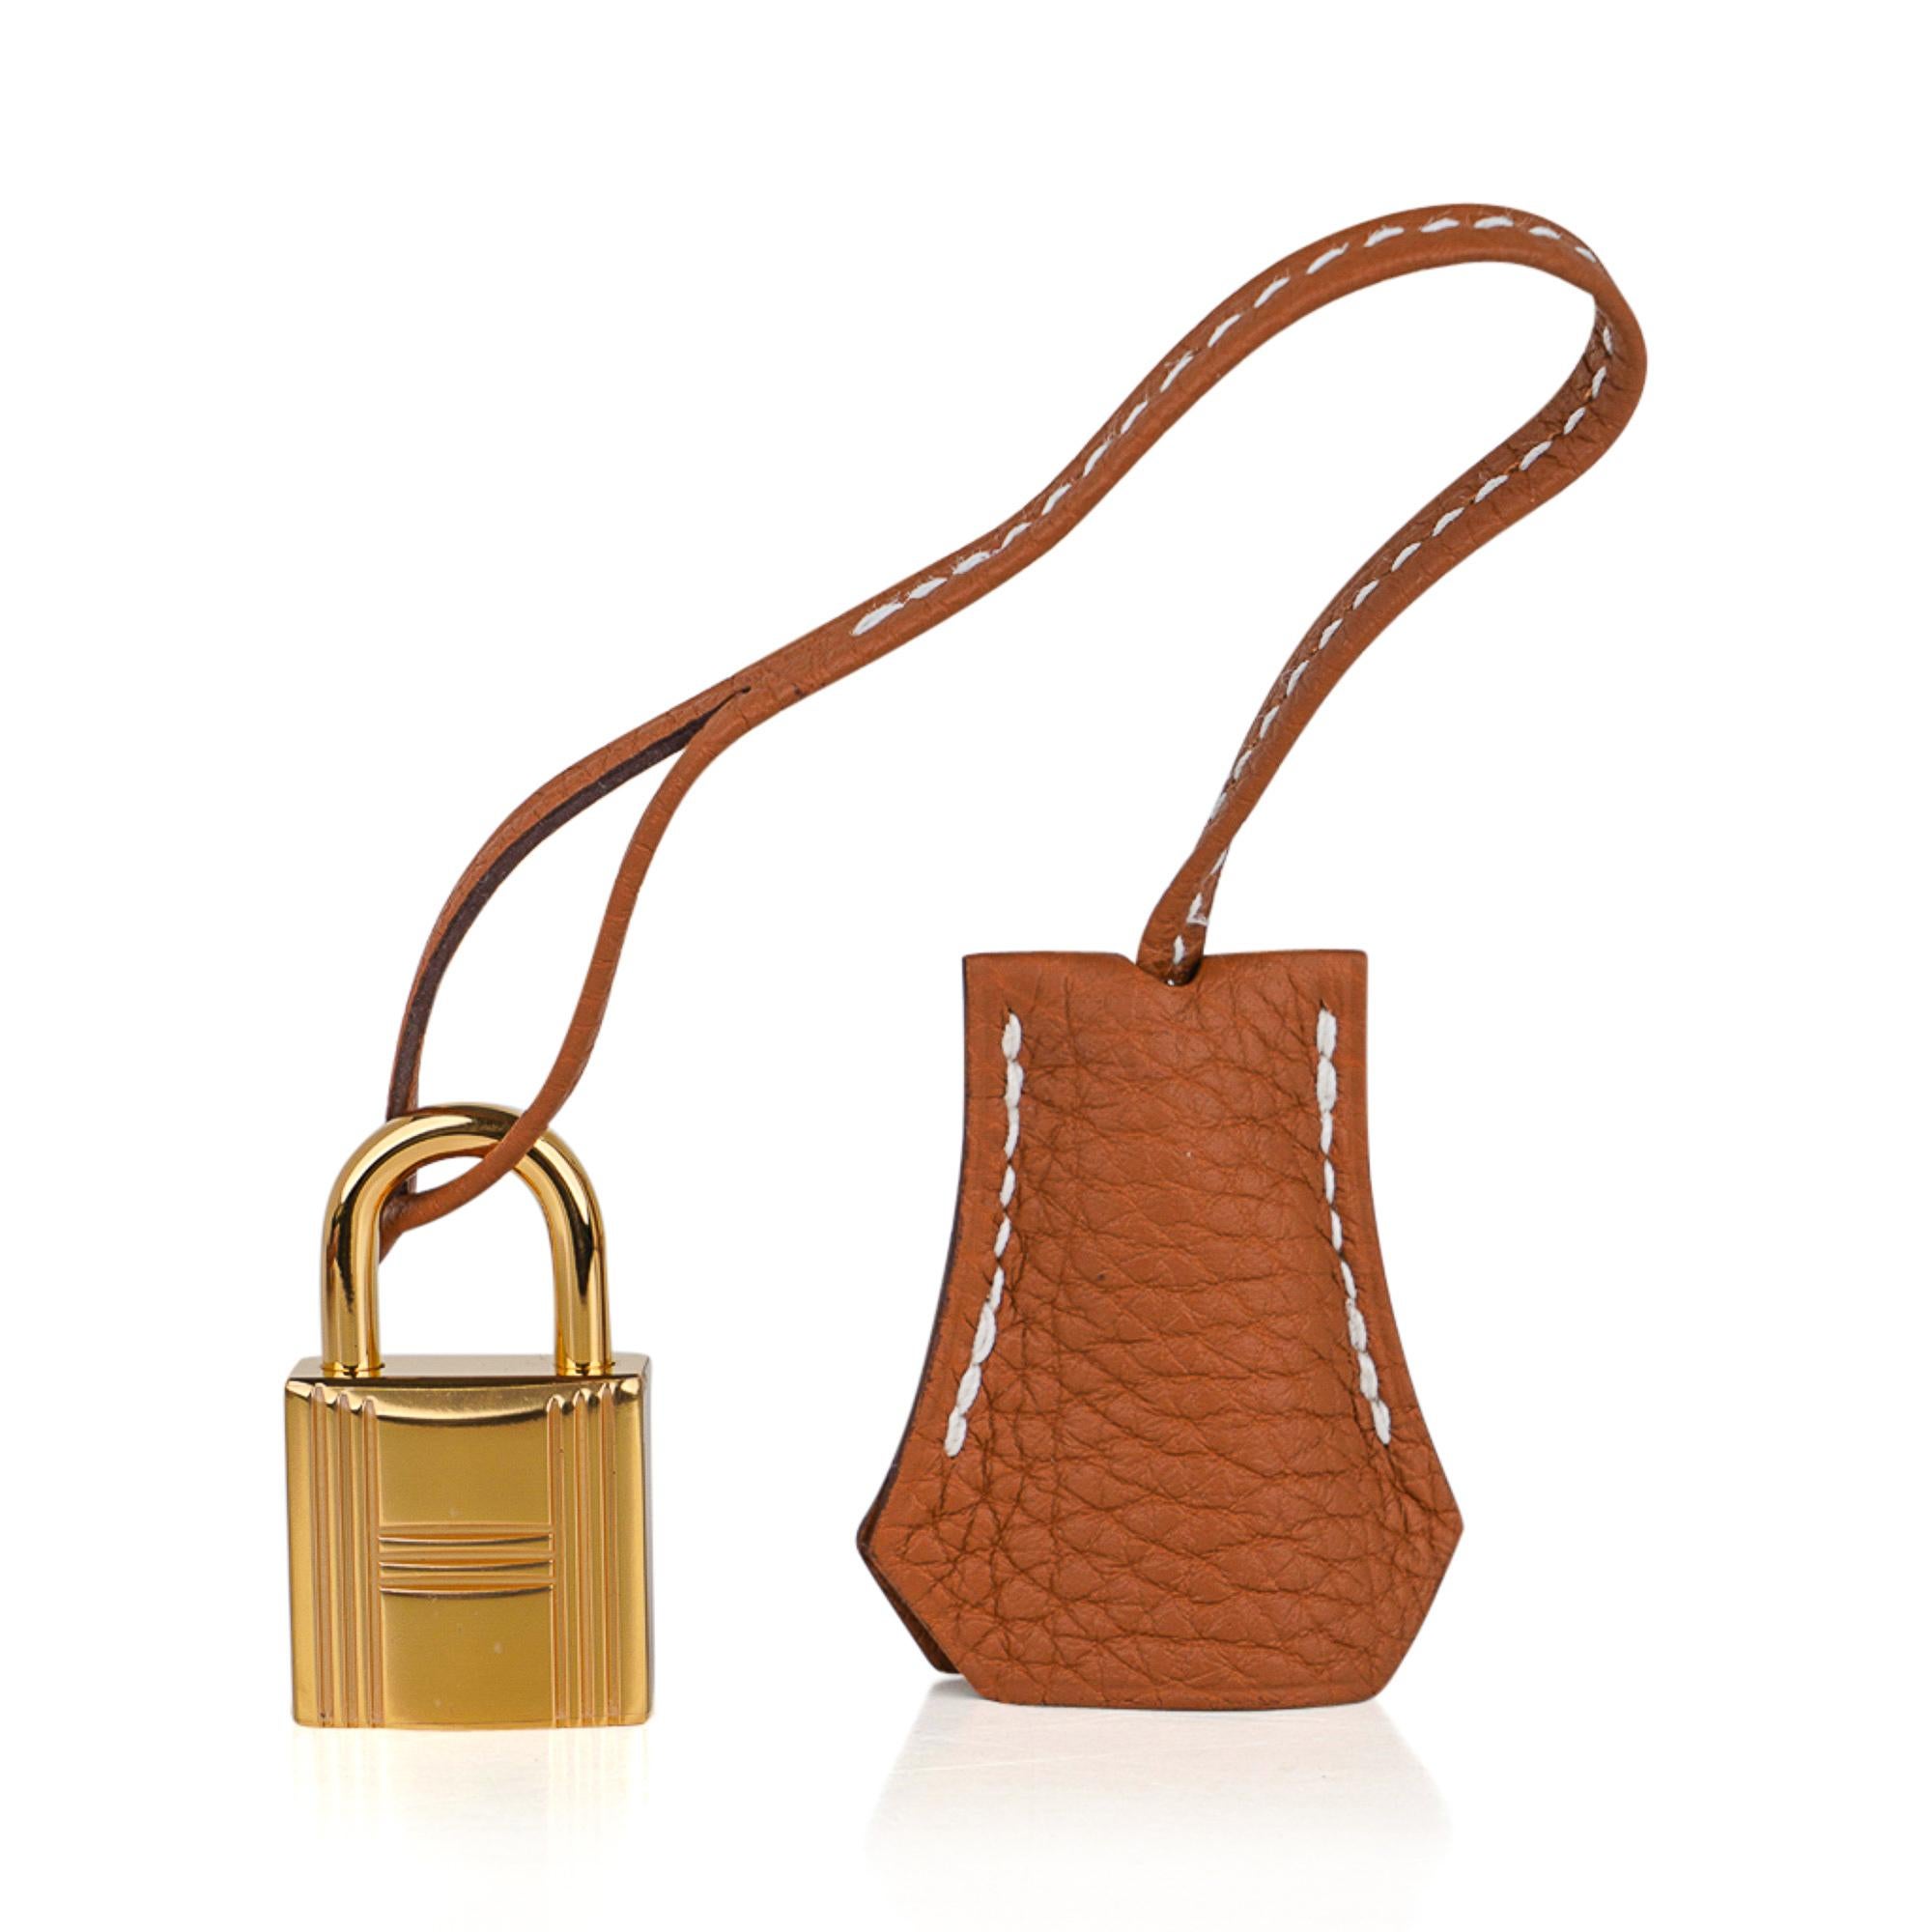 Guaranteed authentic Hermes Birkin HSS 25 bag featured in coveted Craie and iconic Gold.
Subtle and chic, this special order Hermes Birkin with Craie body and Gold sides, straps and trim - is timeless.
This HSS Birkin bag is accentuated Togo leather